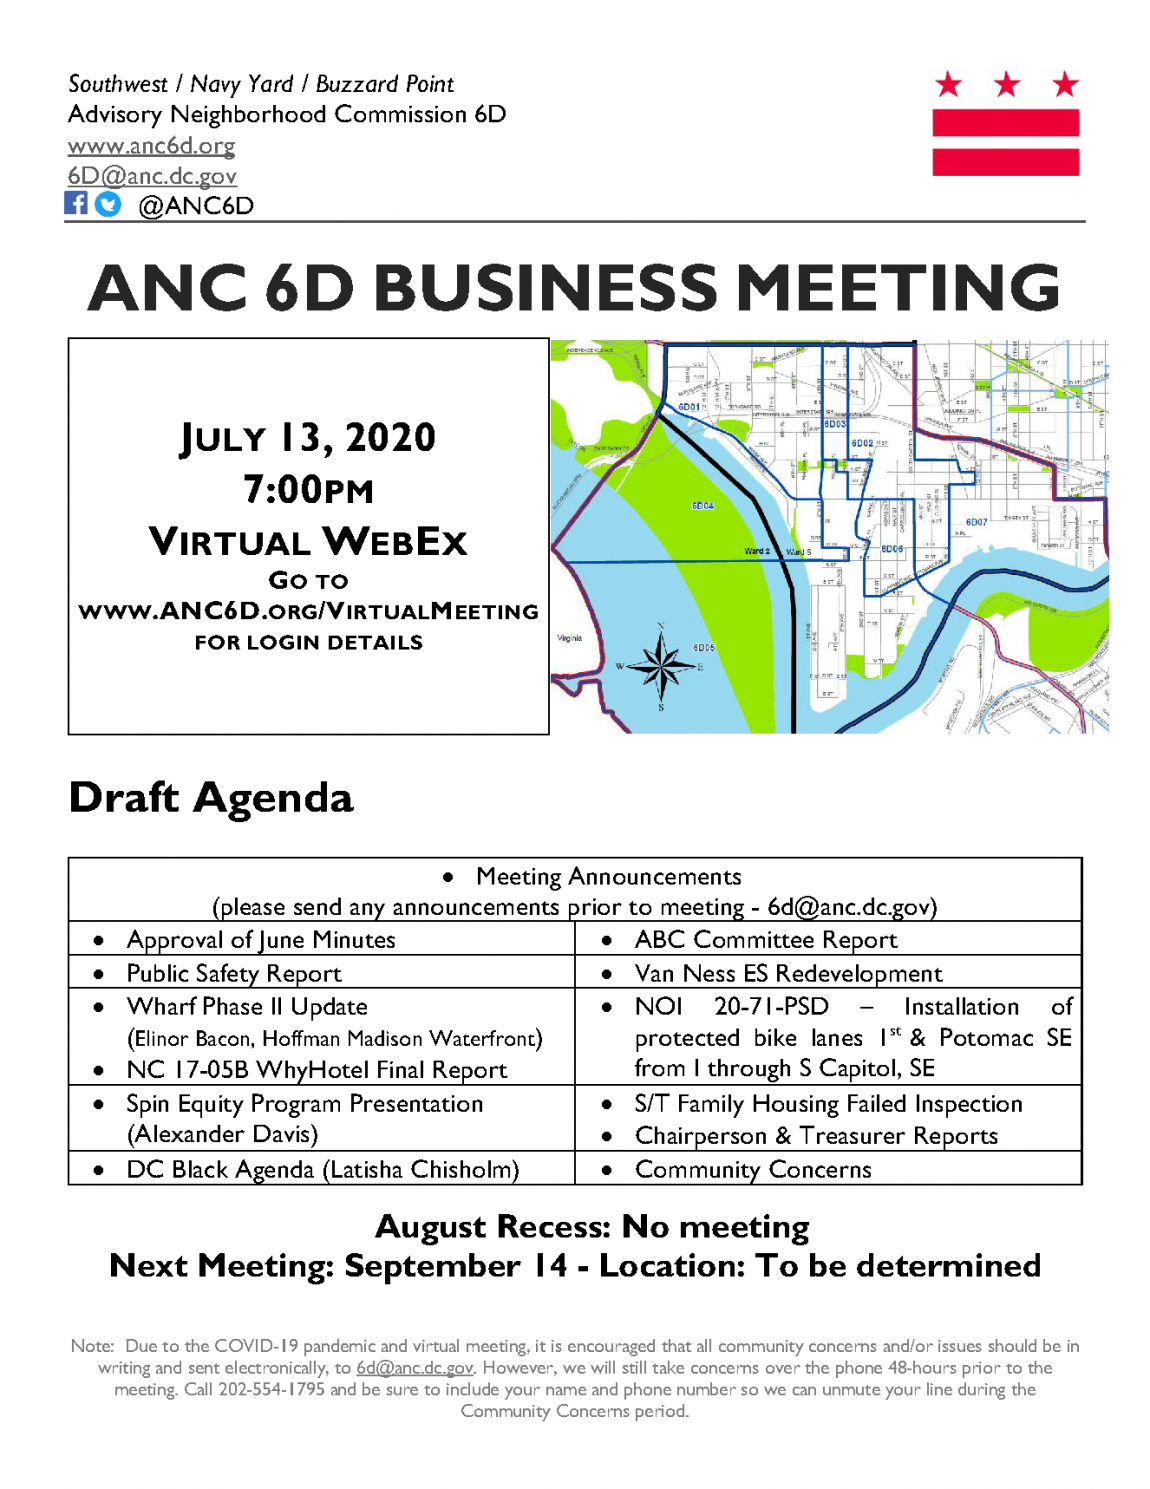 July 13, 2020 Business Meeting Announcement